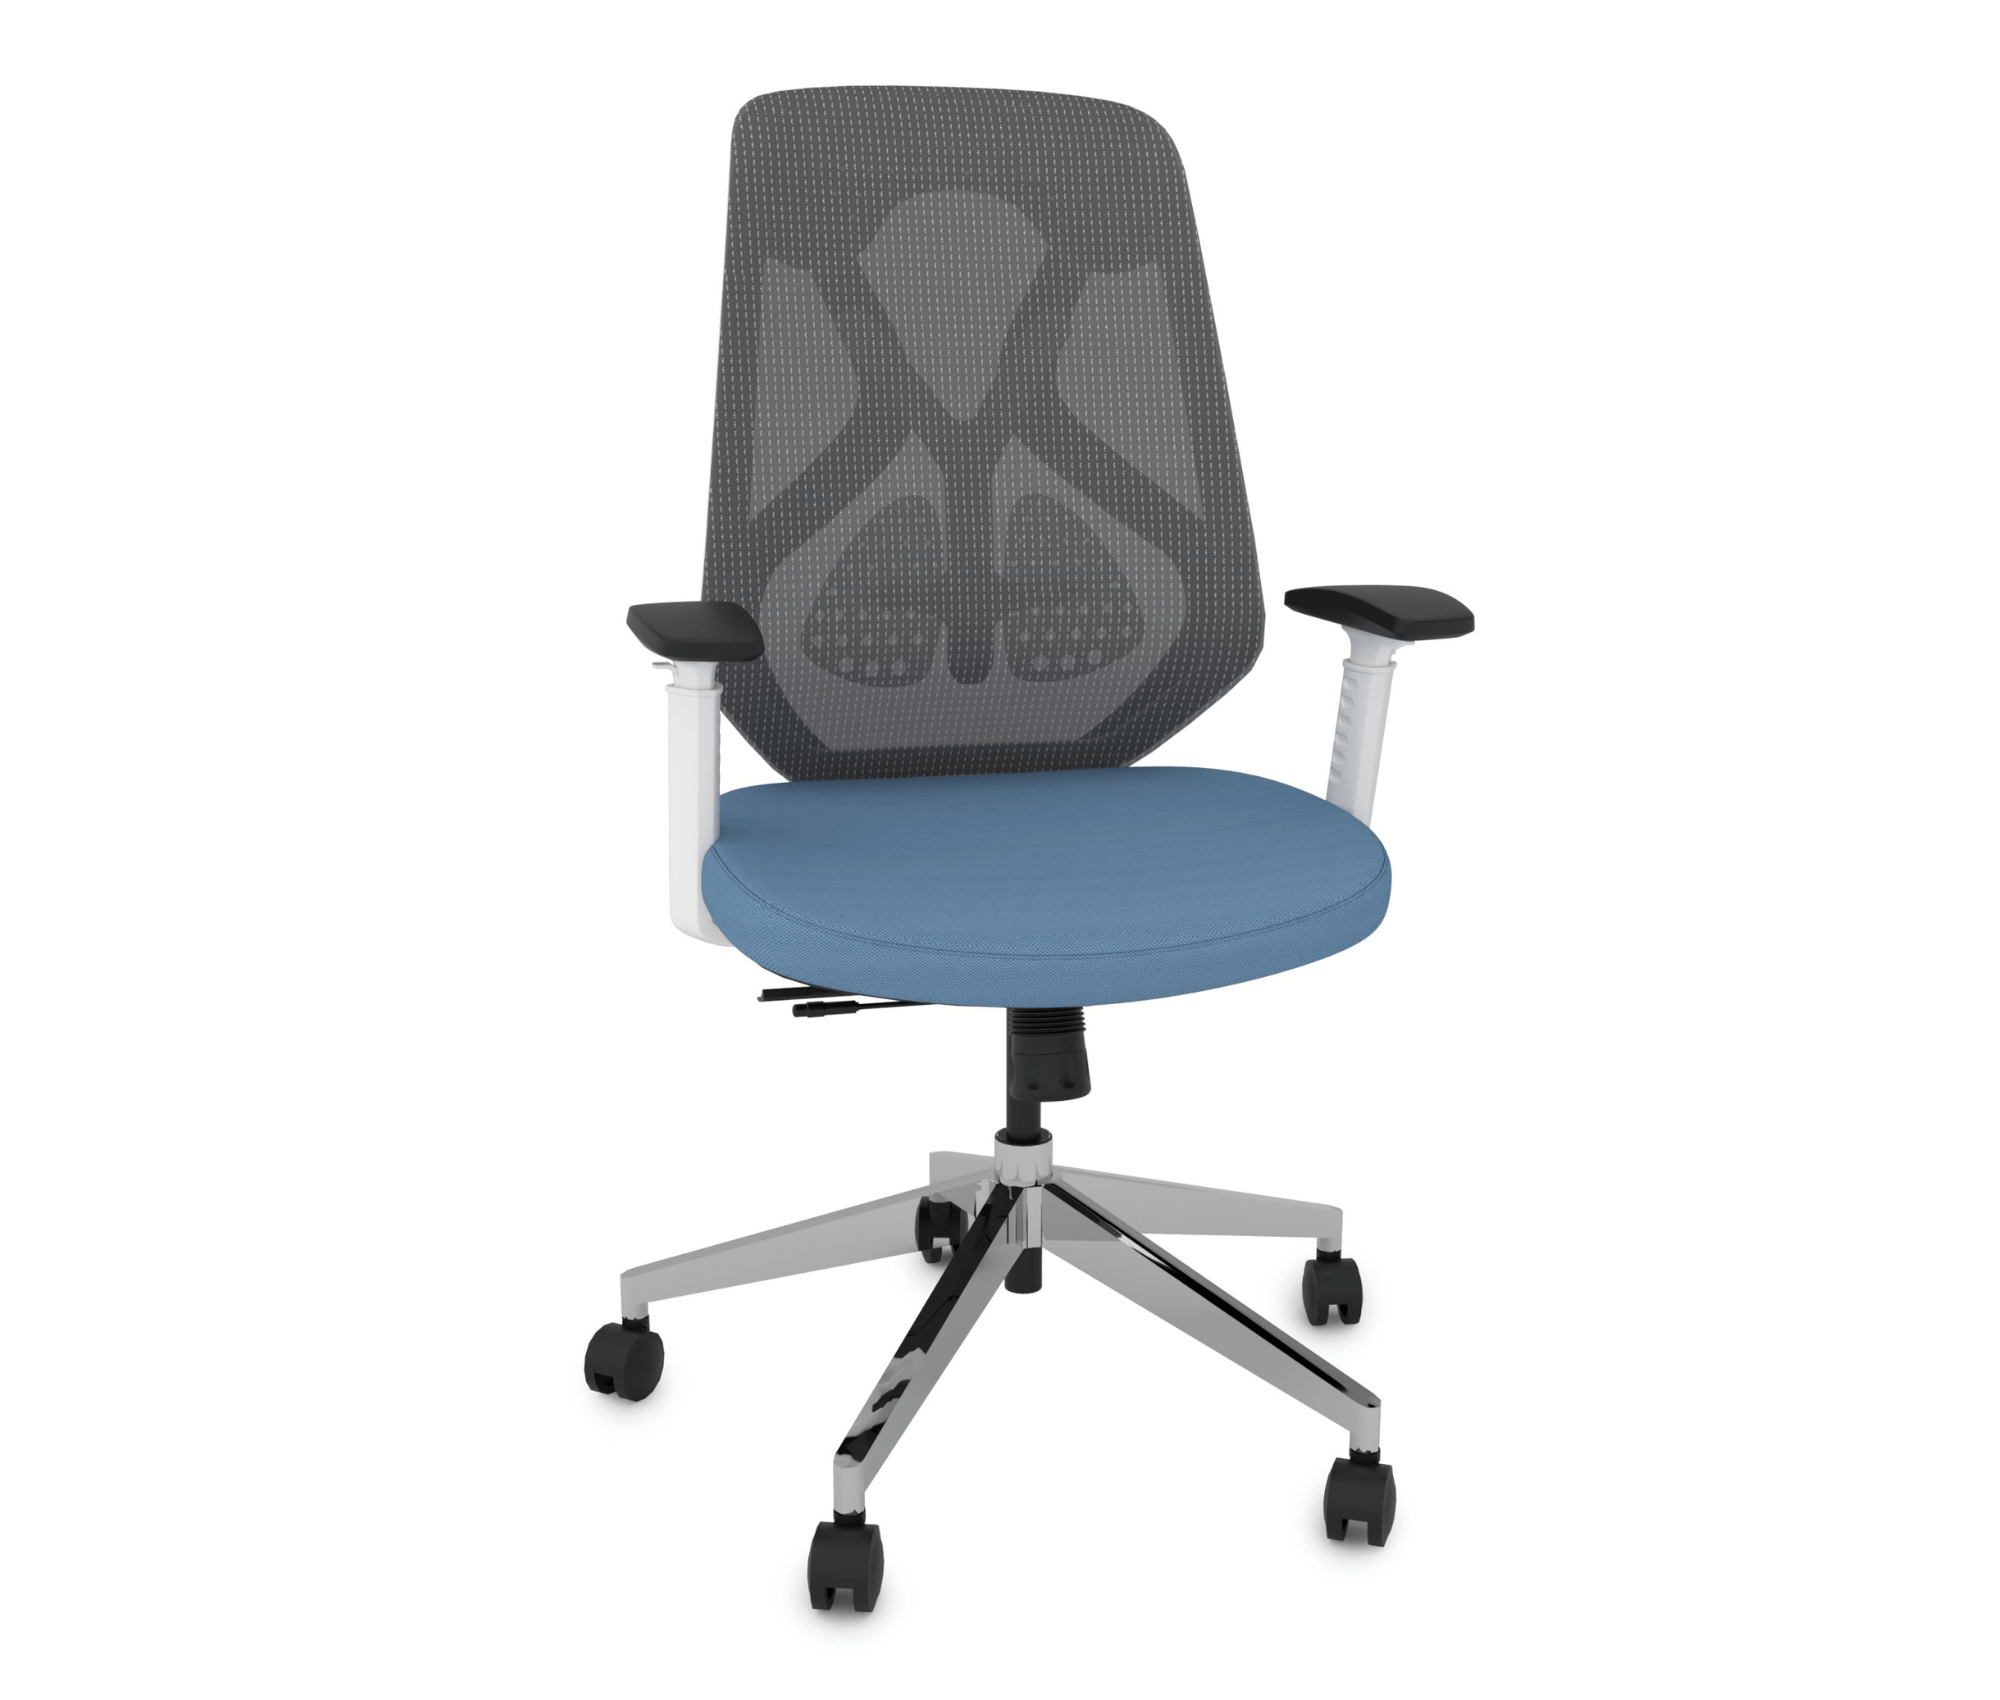 Ergonomic Plus Chair | Posture-Correcting Office Chair Porvata Office Chairs Sky Blue